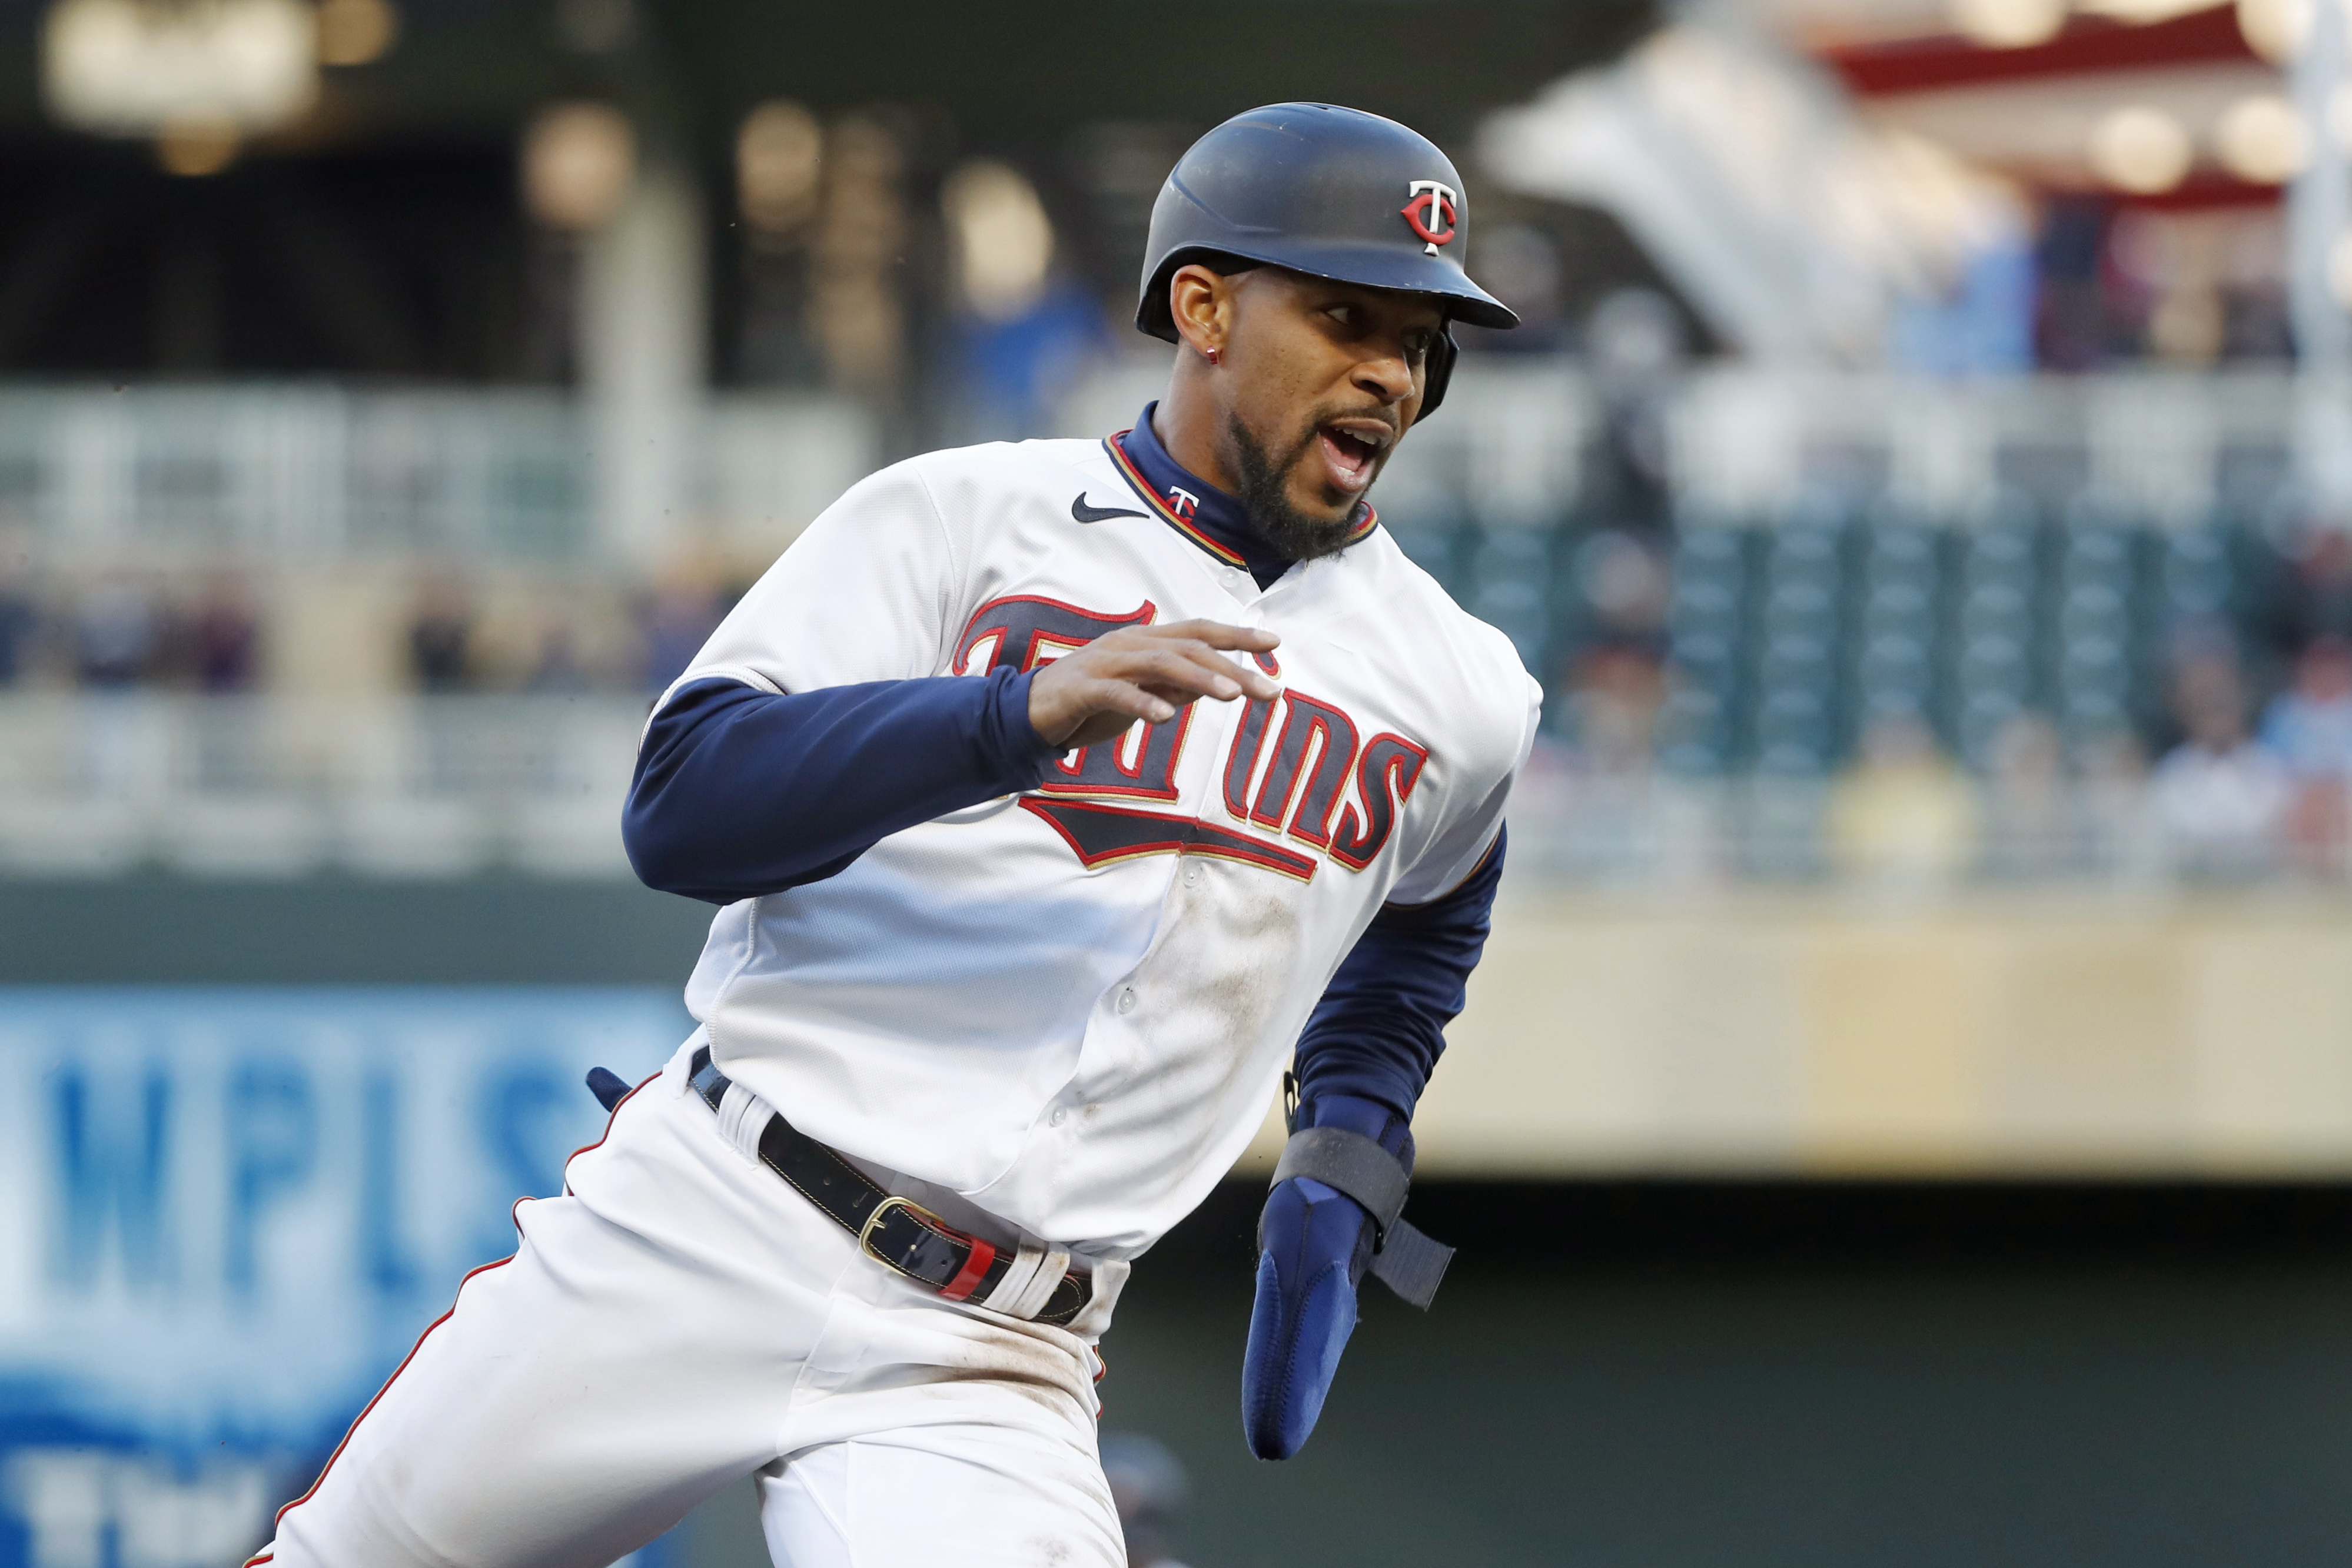 Minnesota Twins' Byron Buxton homers in a baseball game against